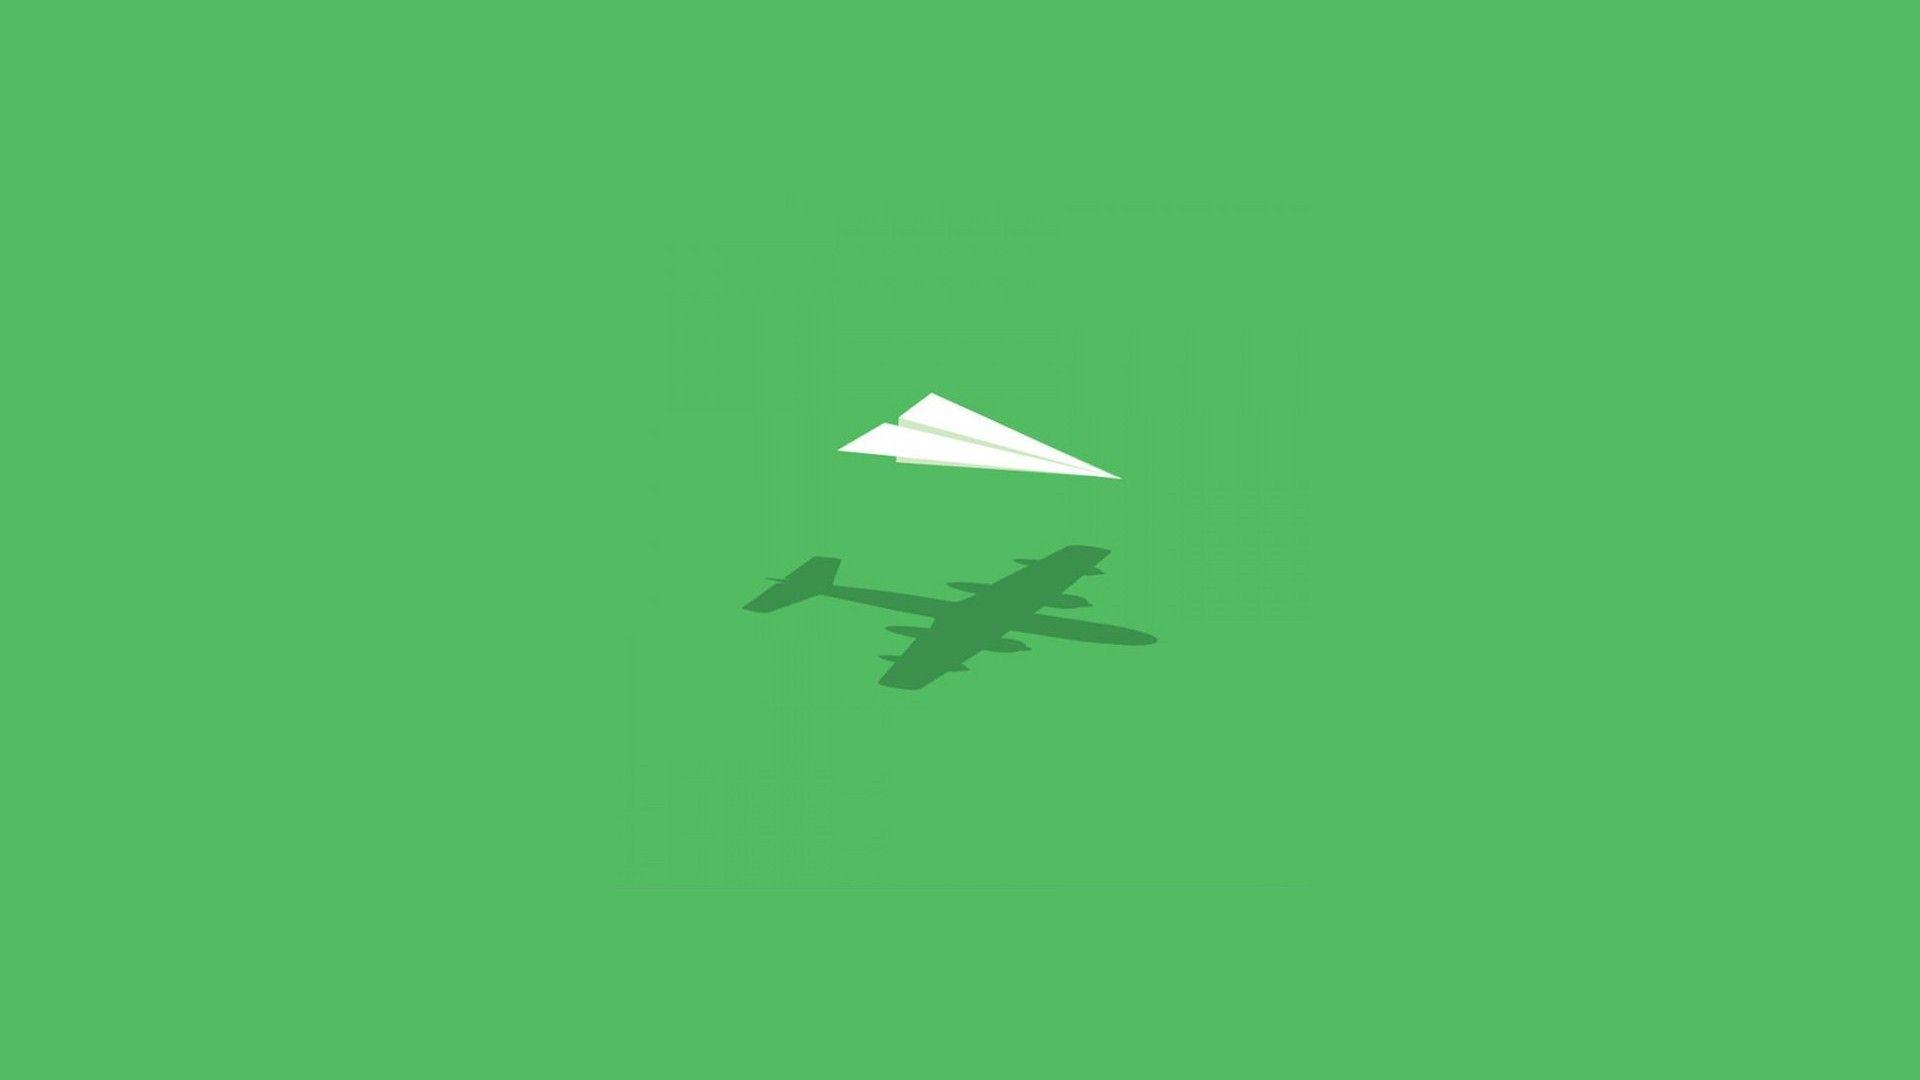 Paper Airplane Imagination Wallpaper 58077 1920x1080 px